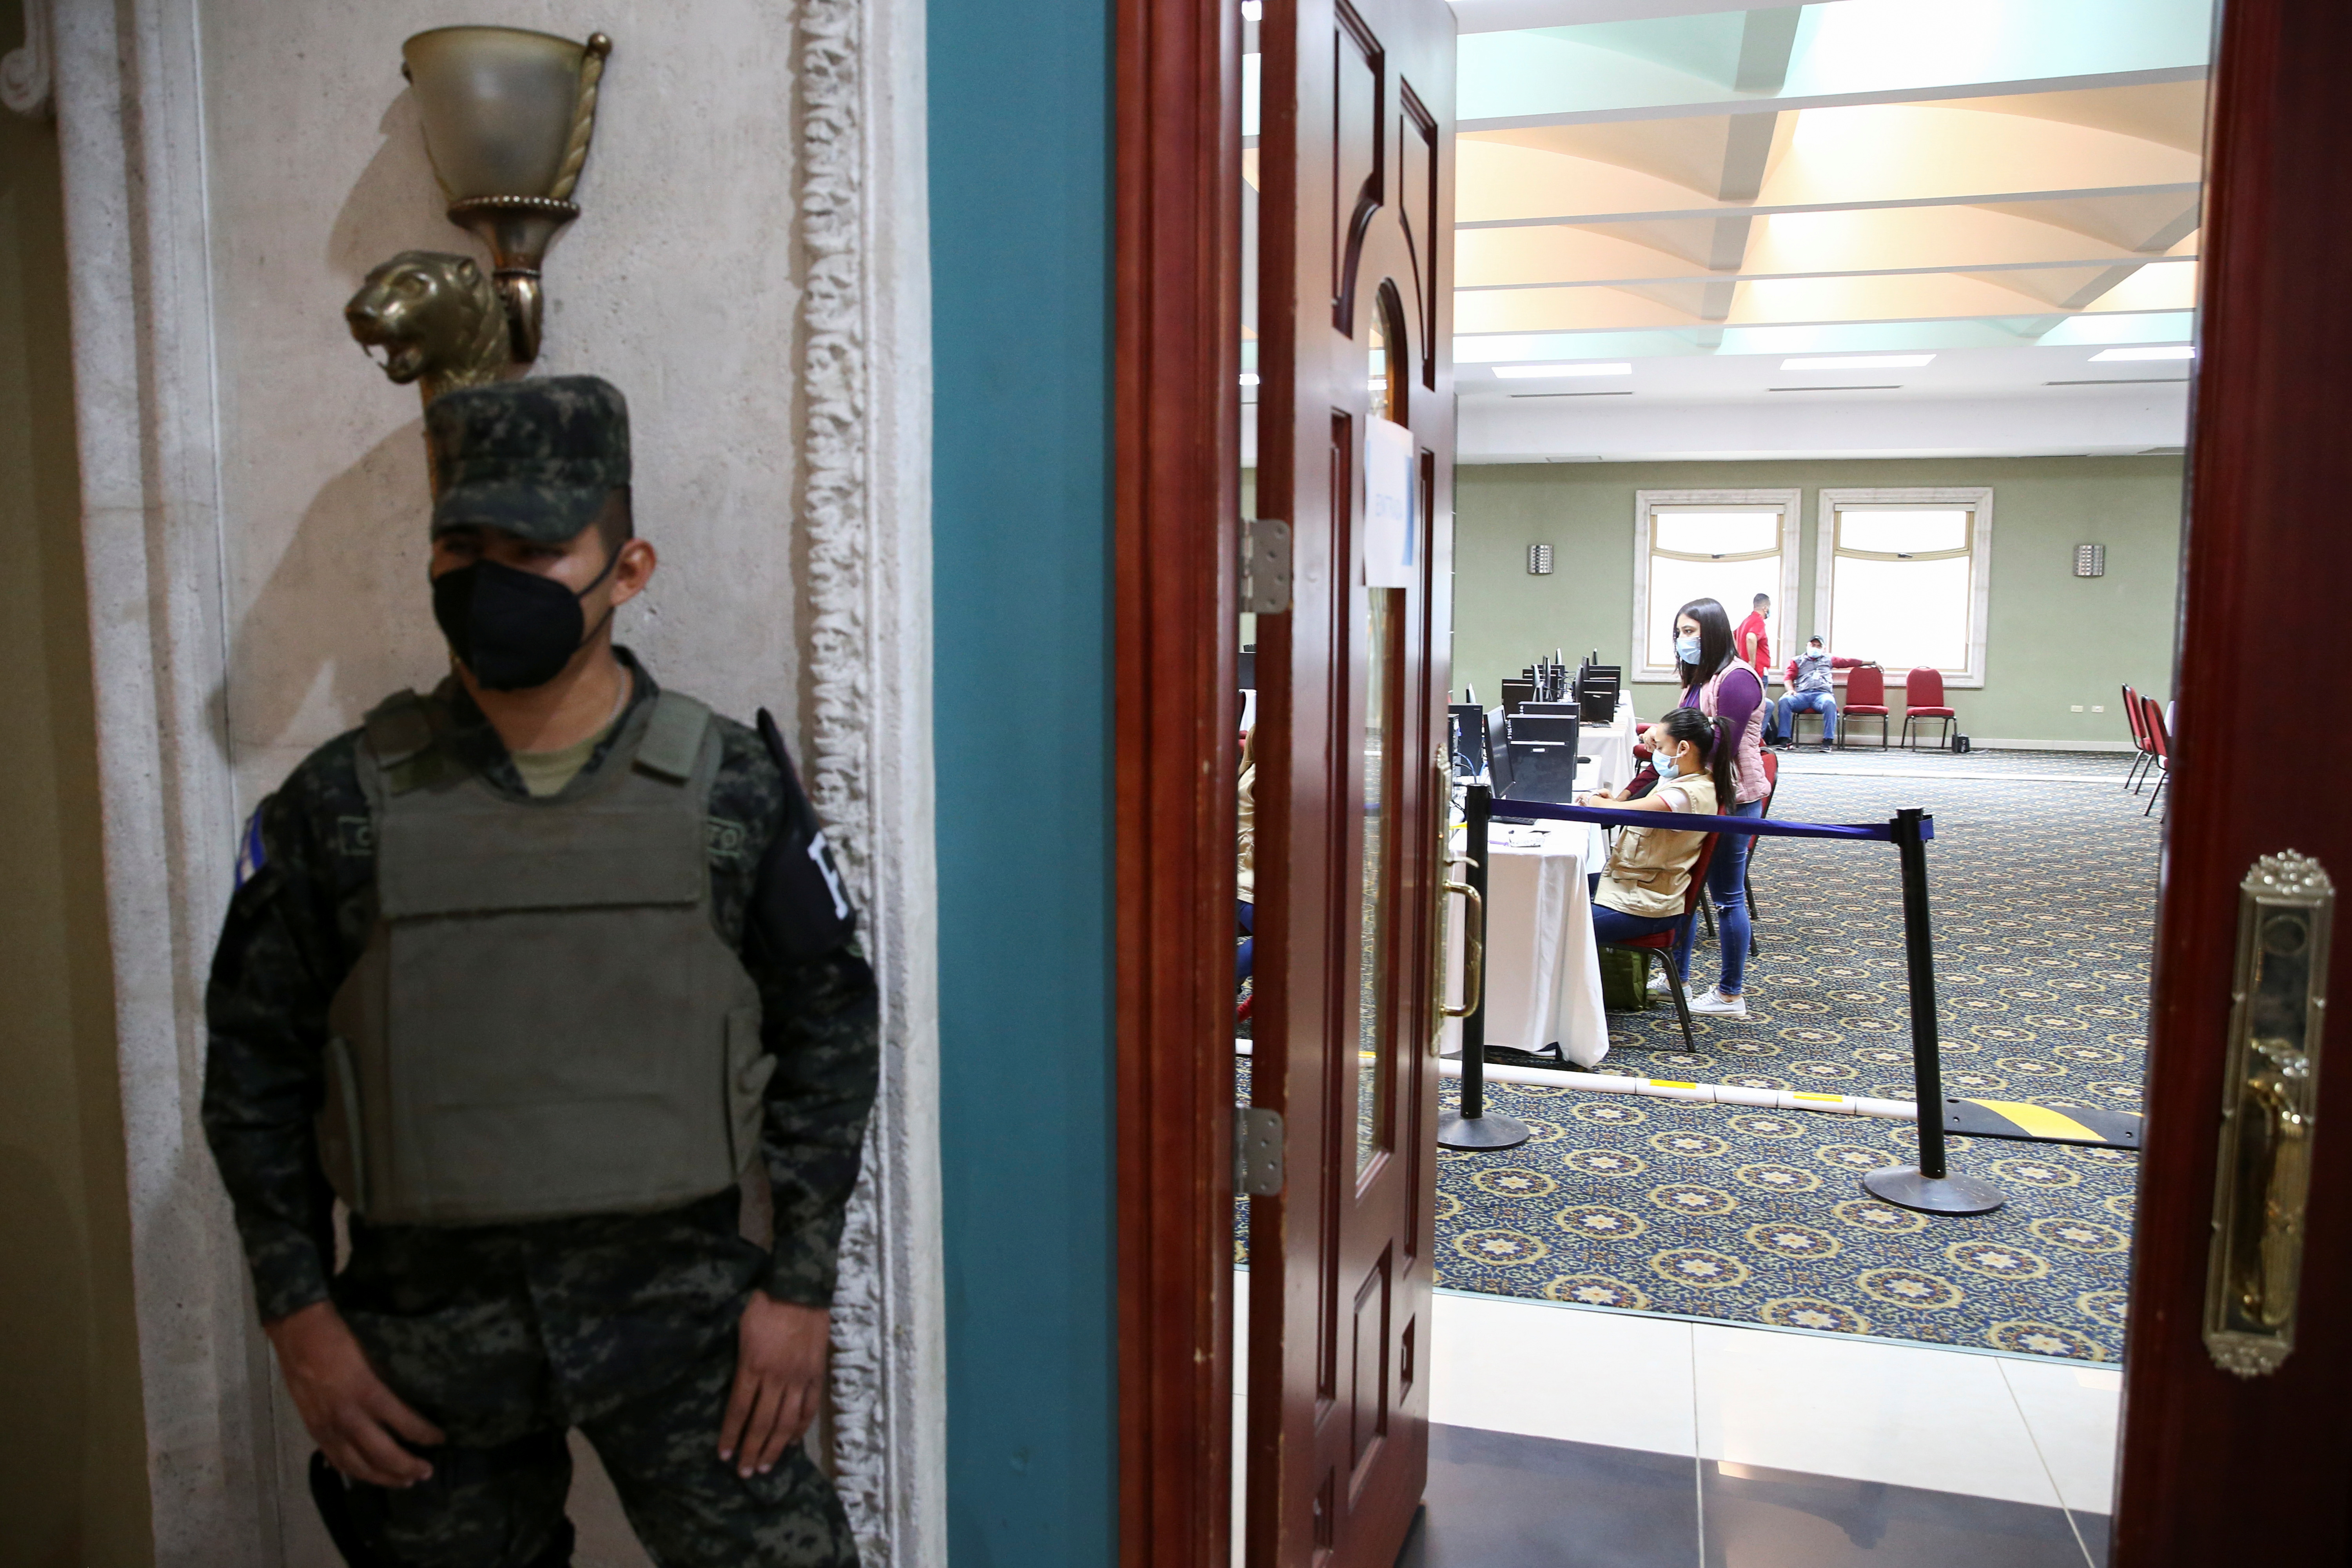 A Honduran military police officer stands guard at the entrance to a vote-counting center of the electoral authority located in a hotel, after the general election in Tegucigalpa, Honduras November 29, 2021. REUTERS/Jose Cabezas